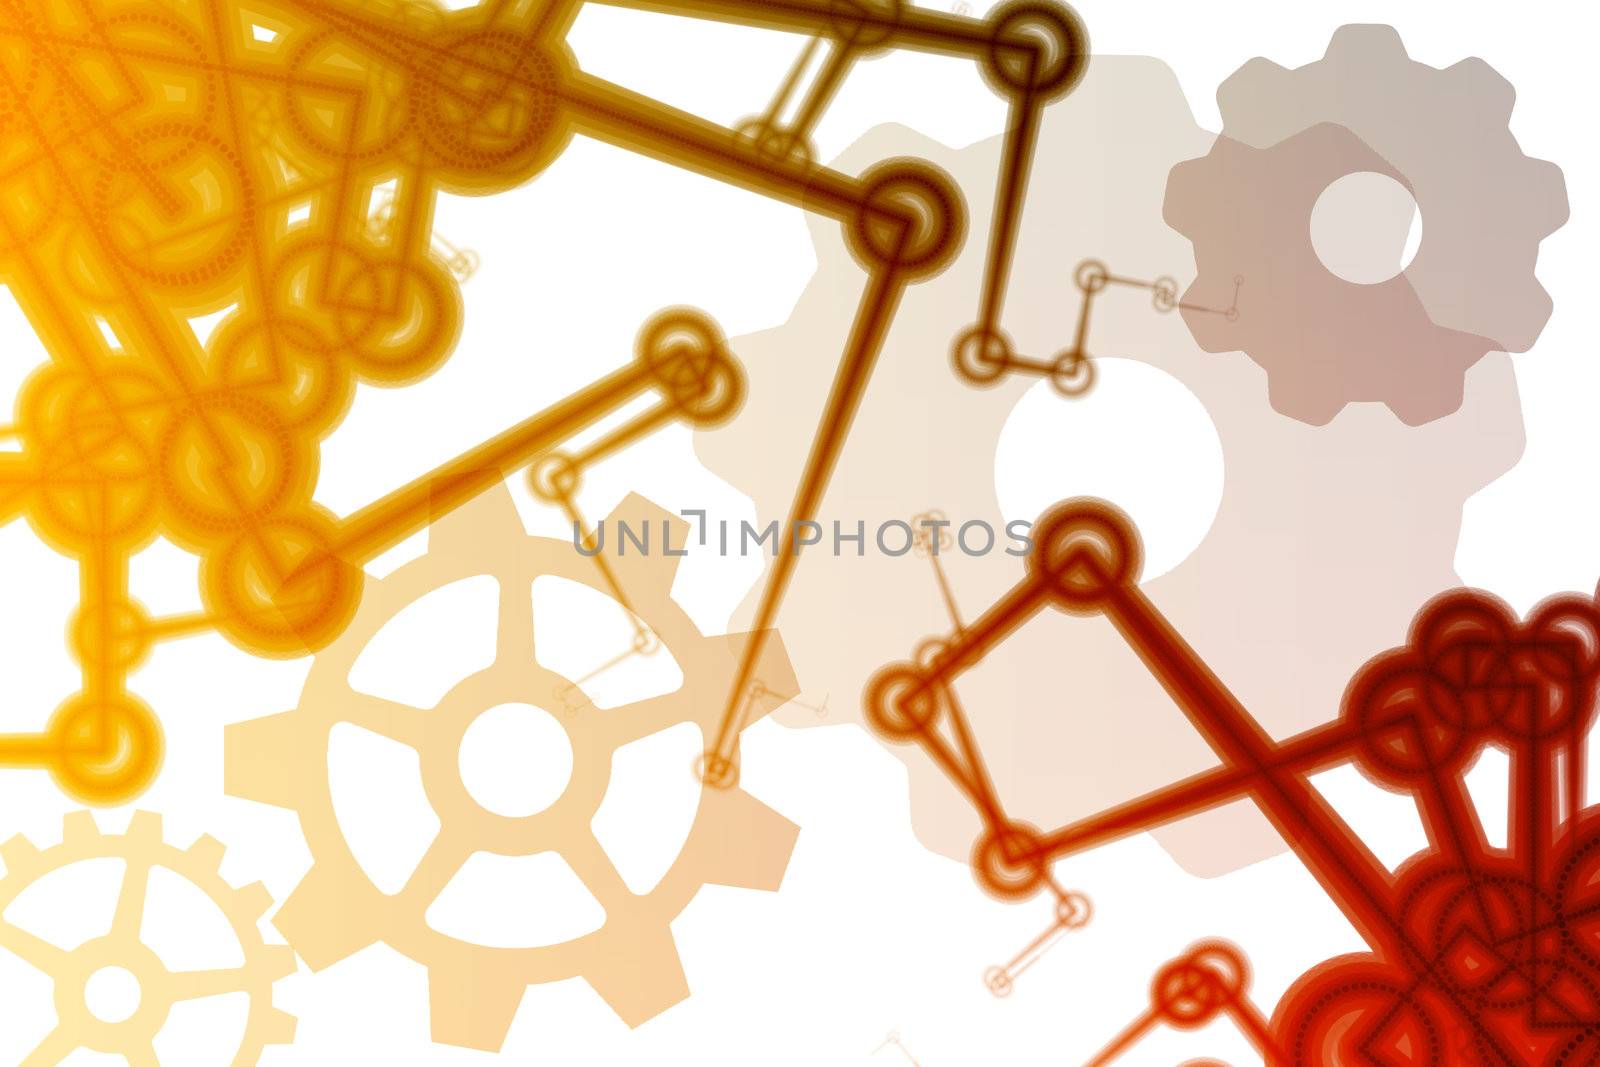 Futuristic Factory Robot Tech Arms Abstract Illustration